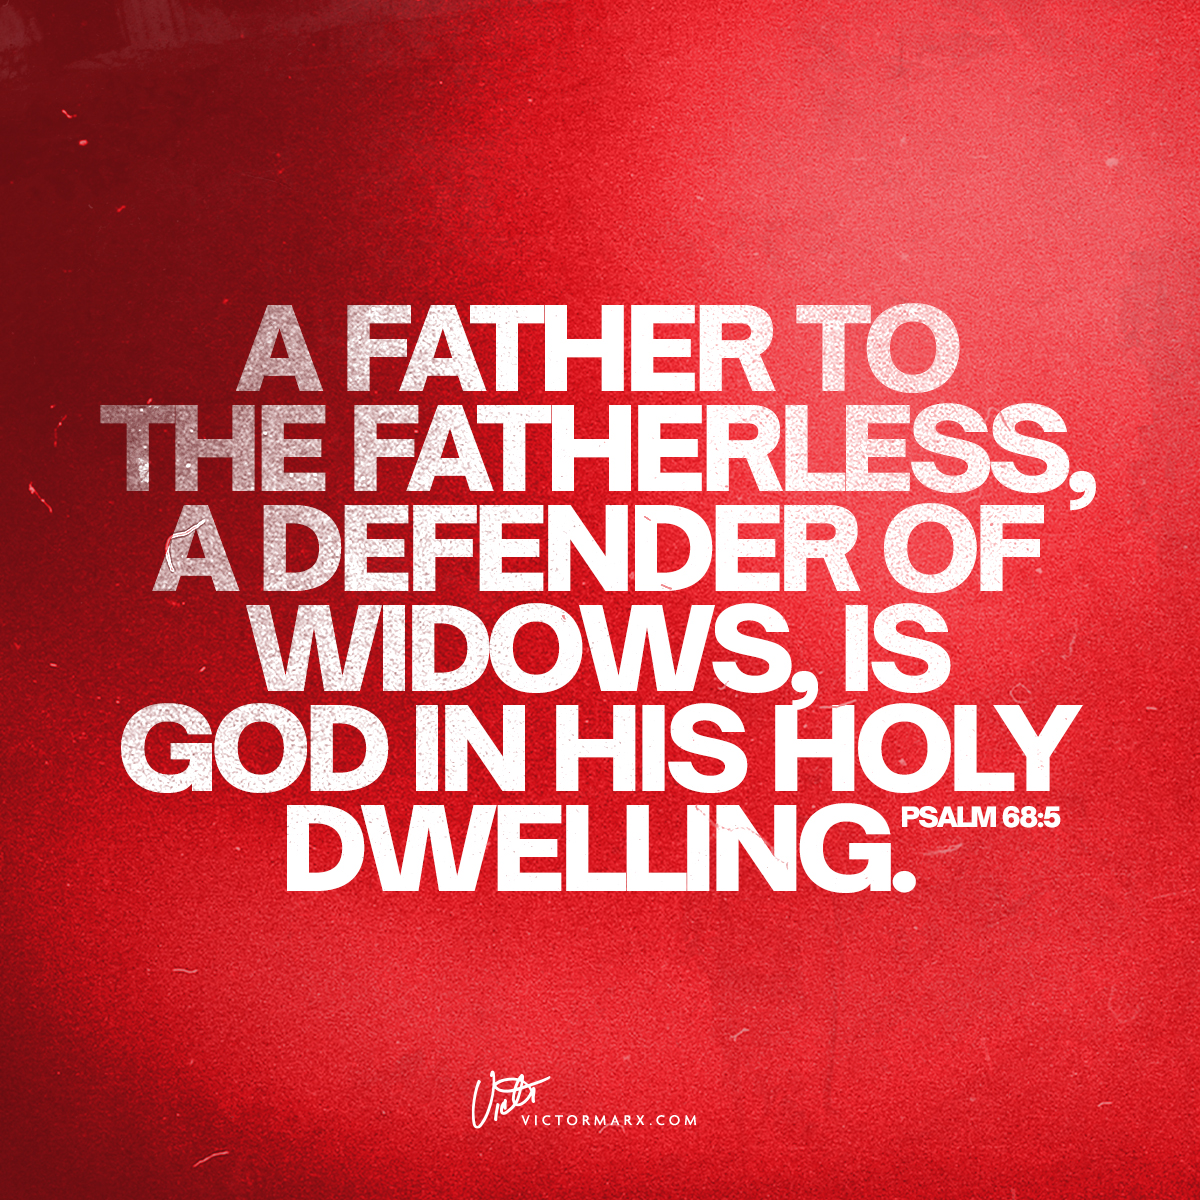 'A FATHER TO THE FATHERLESS DEFENDER OF WIDOWS IS GOD IN HIS HOLY DWELLING. PSALM 68:5 Vith VICTORMARX.COM'